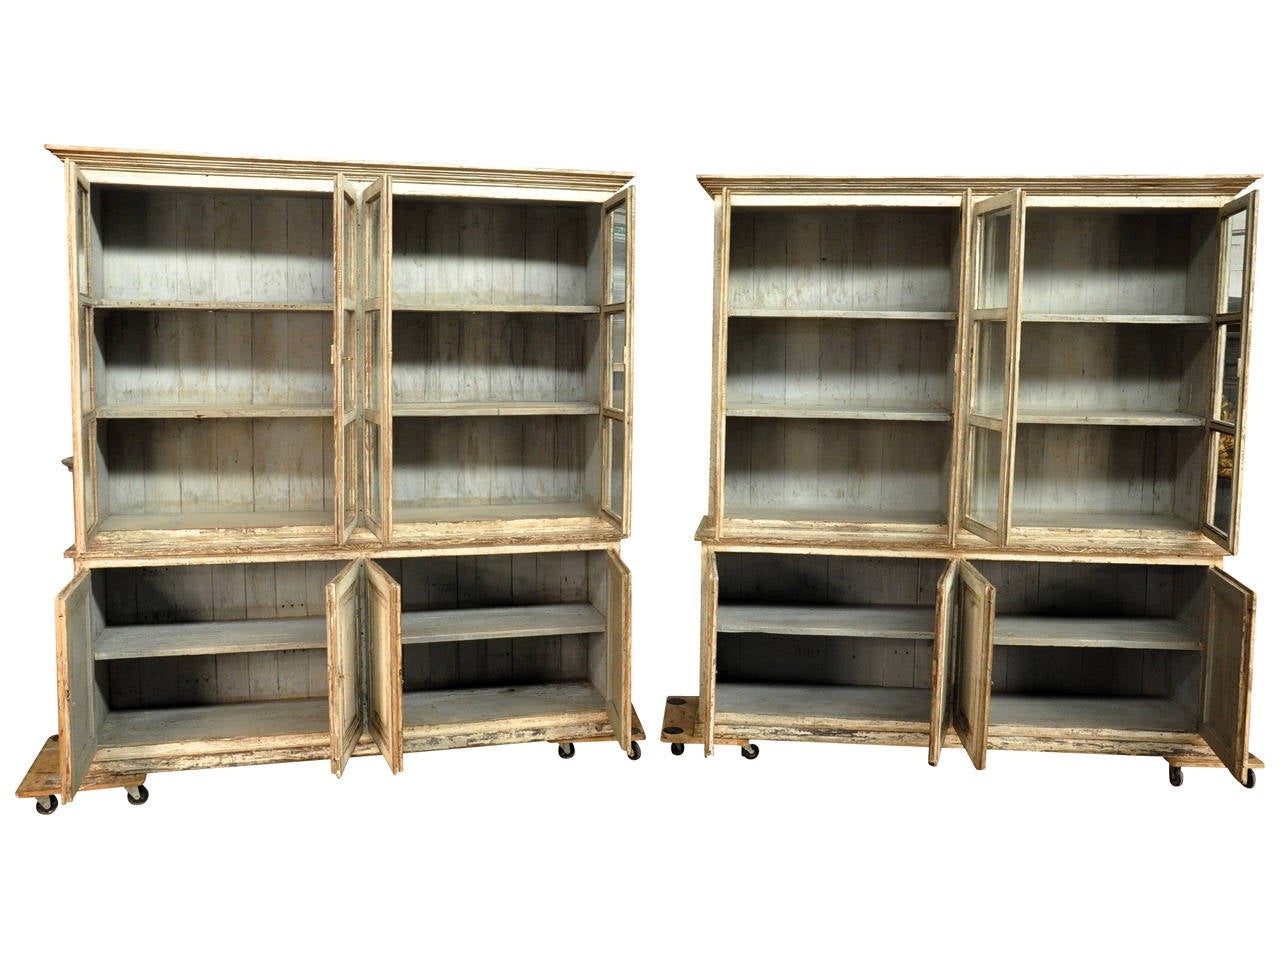 Pair of Early 19th Century Bookcases in Solid Painted Wood from Portugal 1